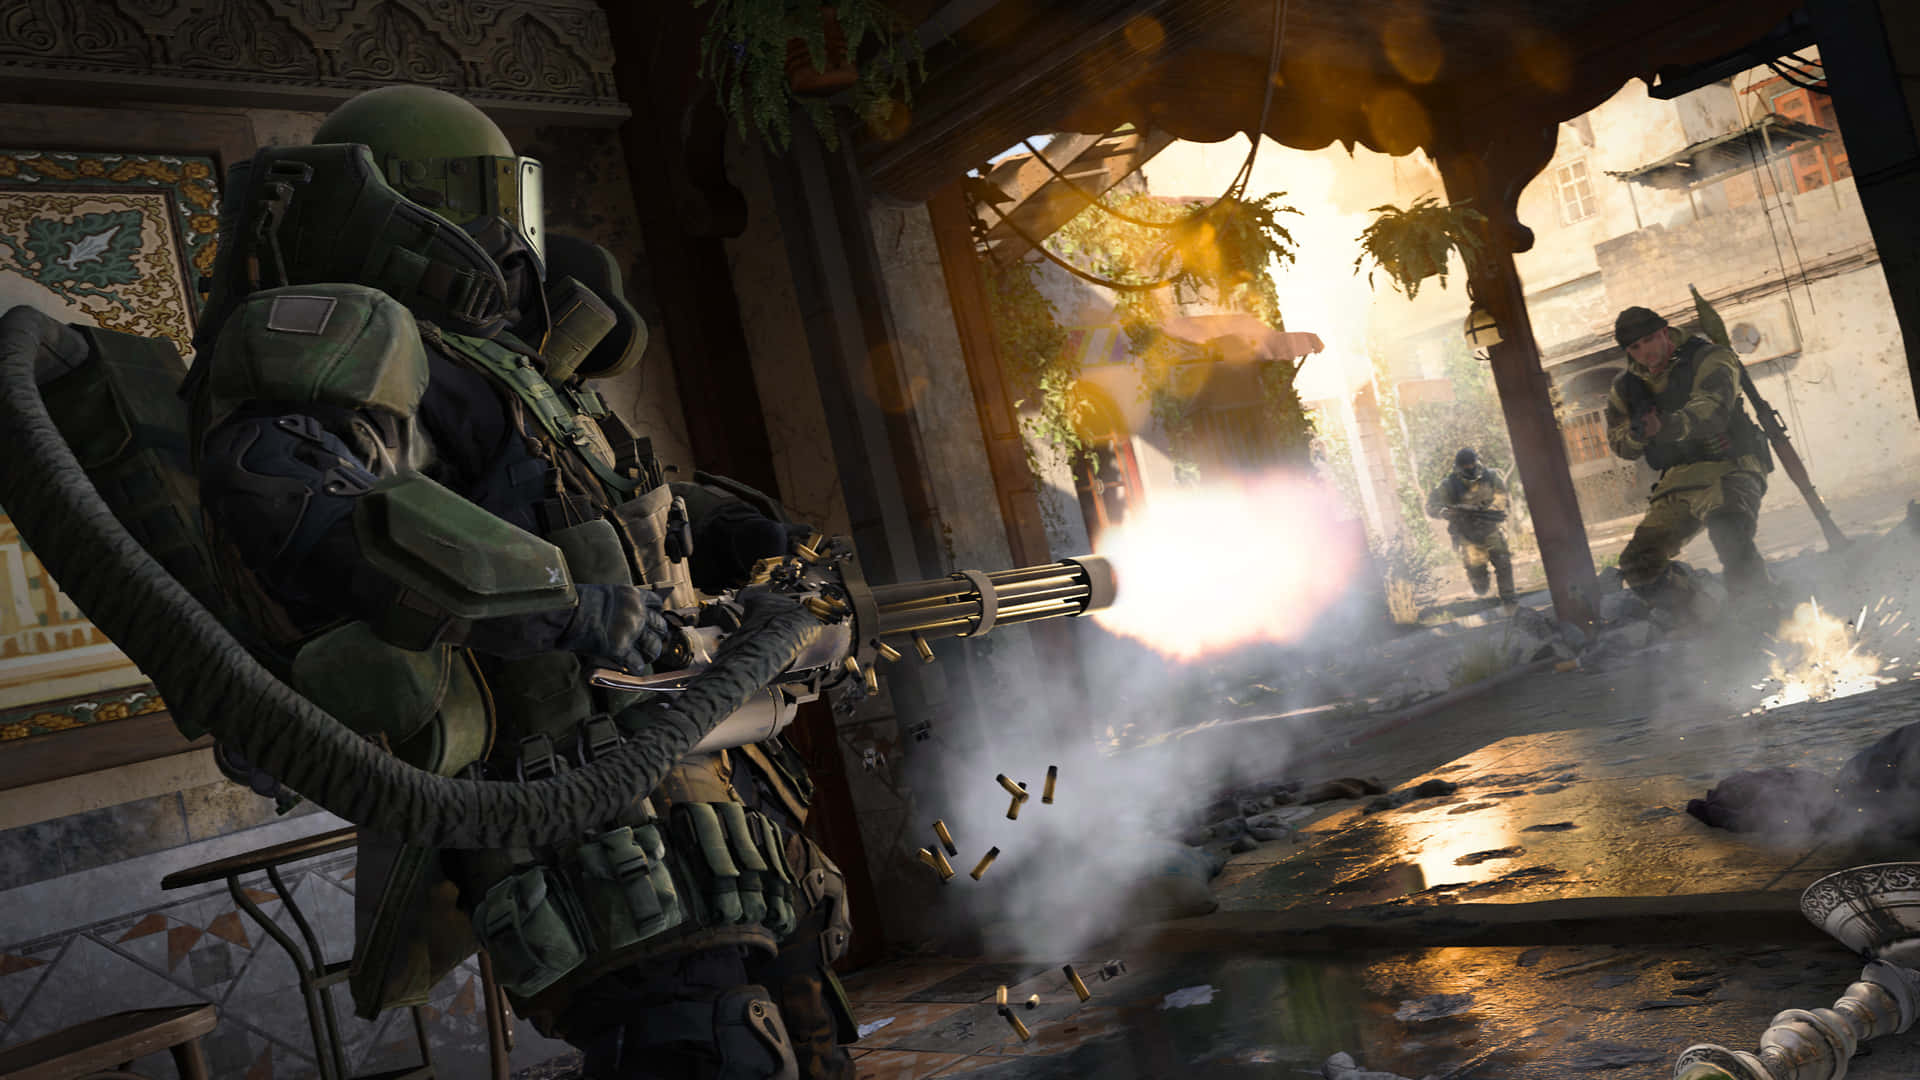 Epic Graphics and Gameplay of the HD Call of Duty Modern Warfare